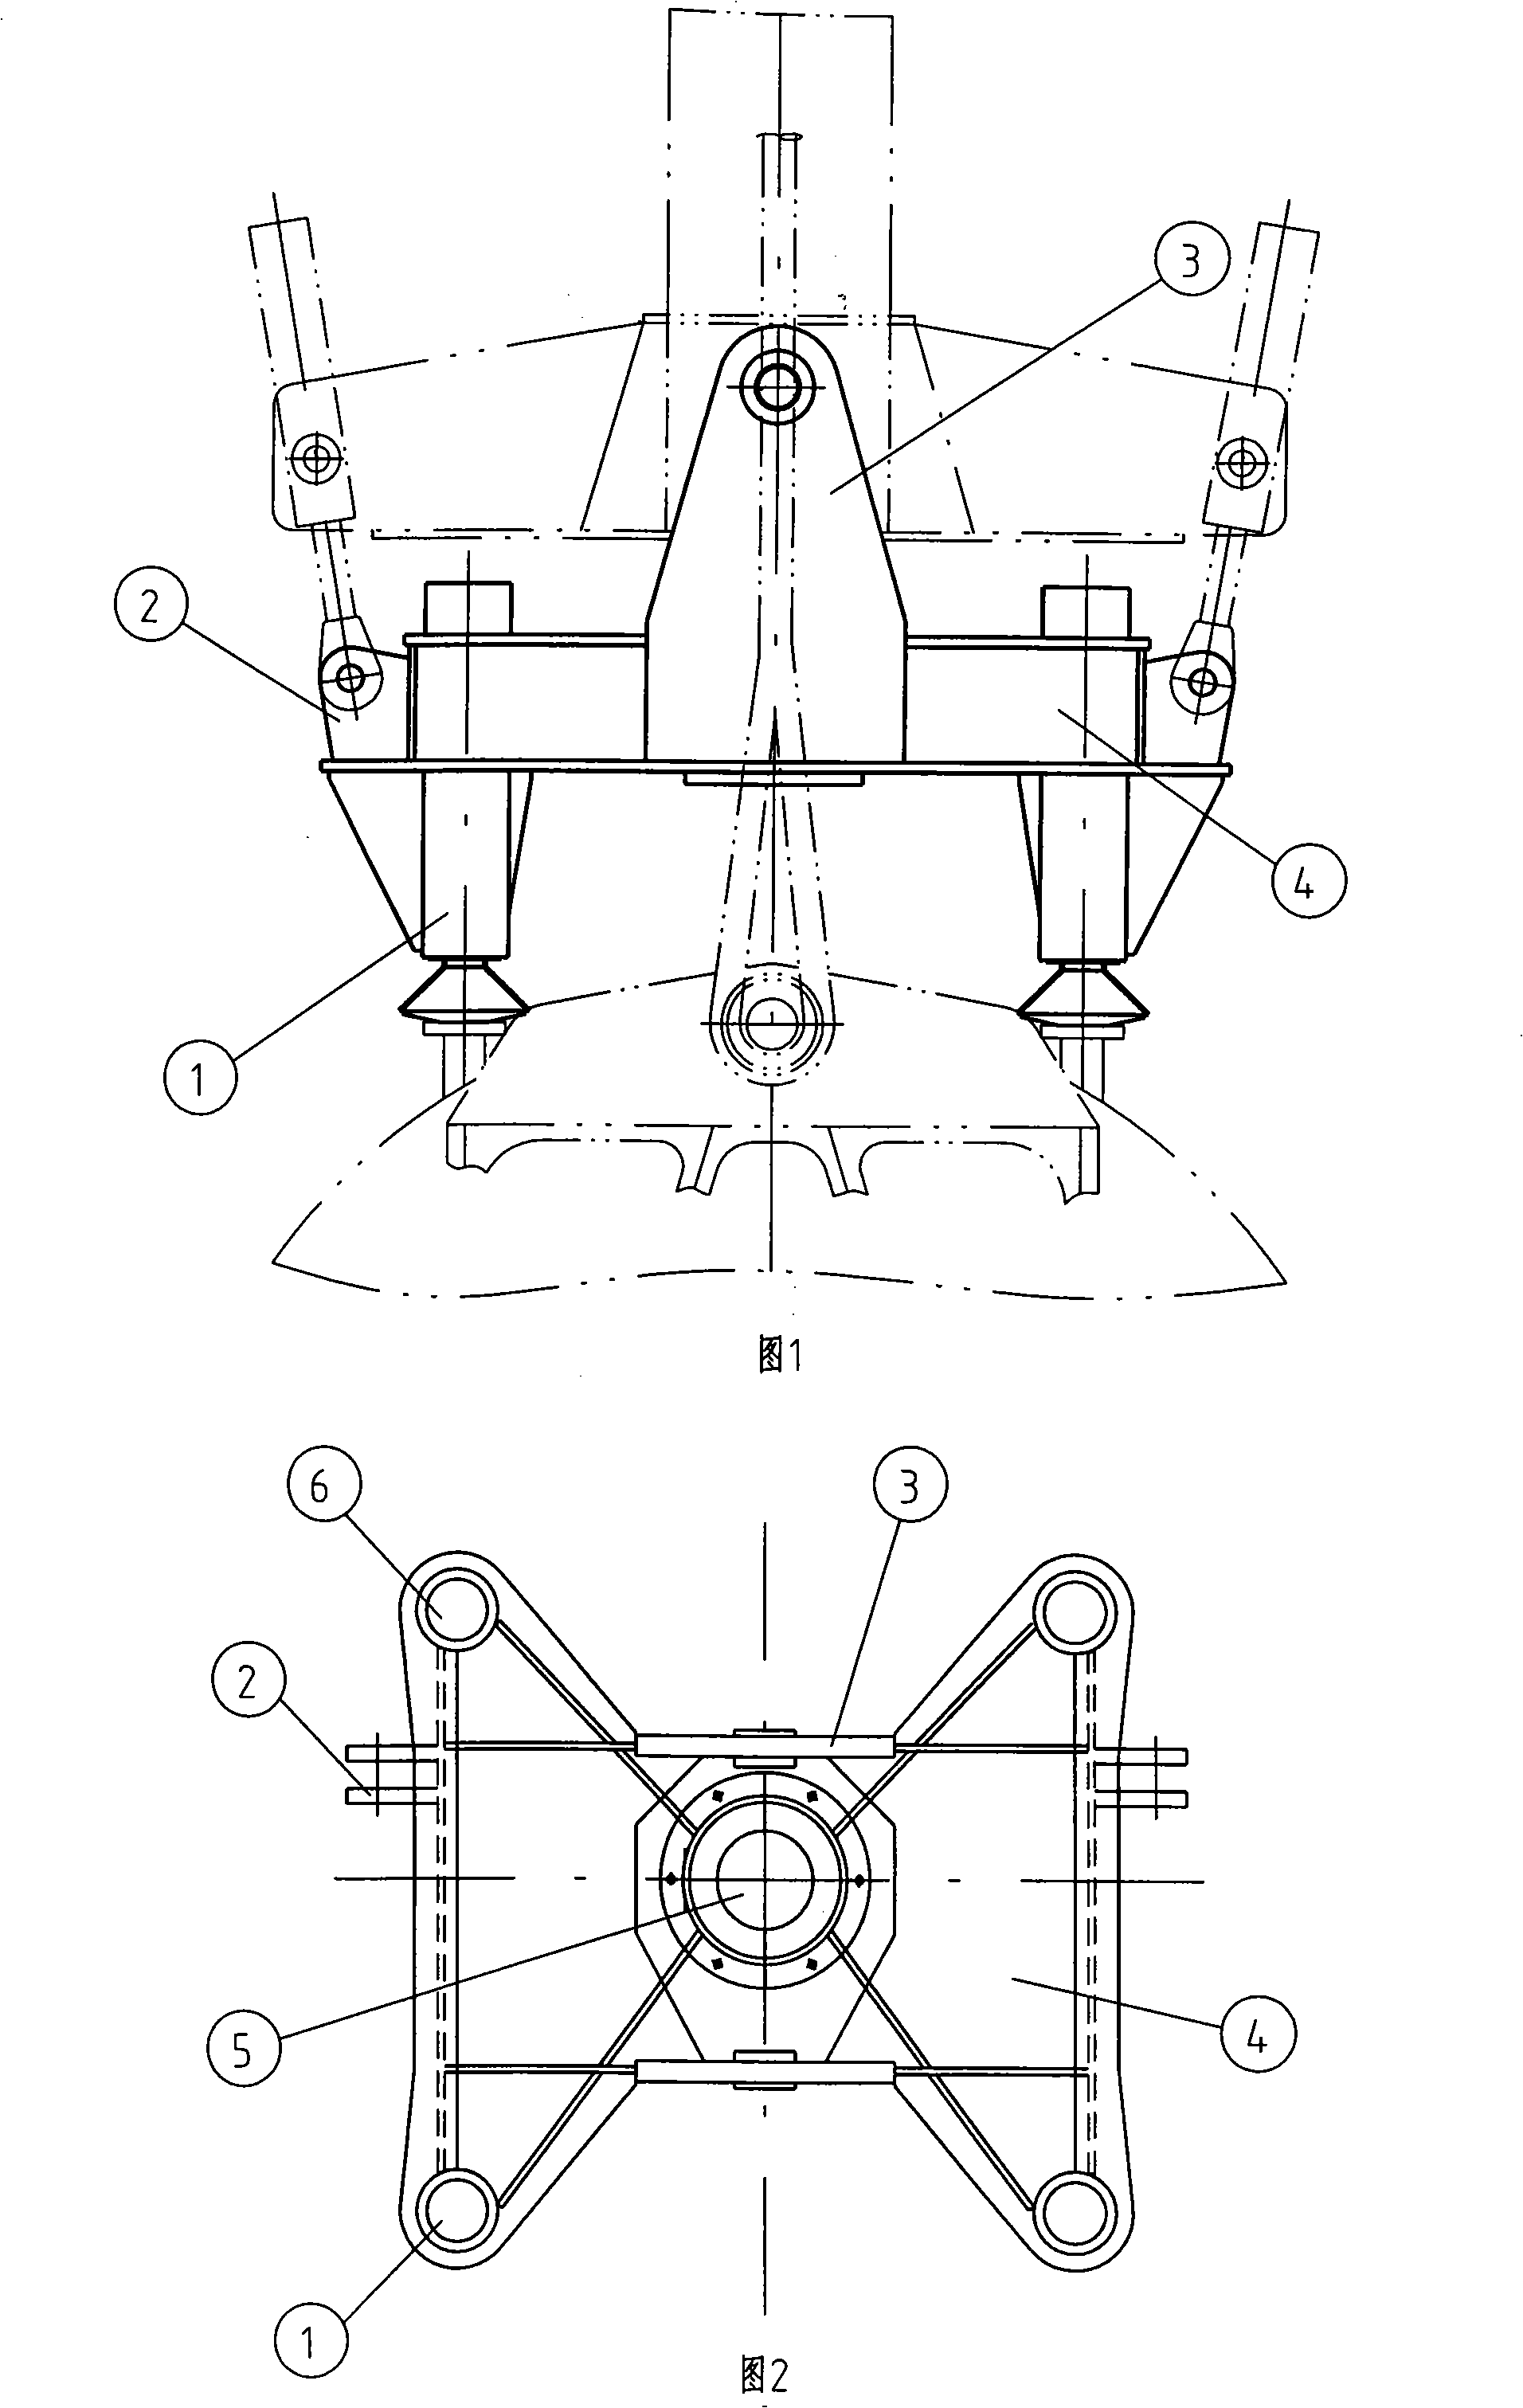 Detachable four fulcrum type docking head for submersible